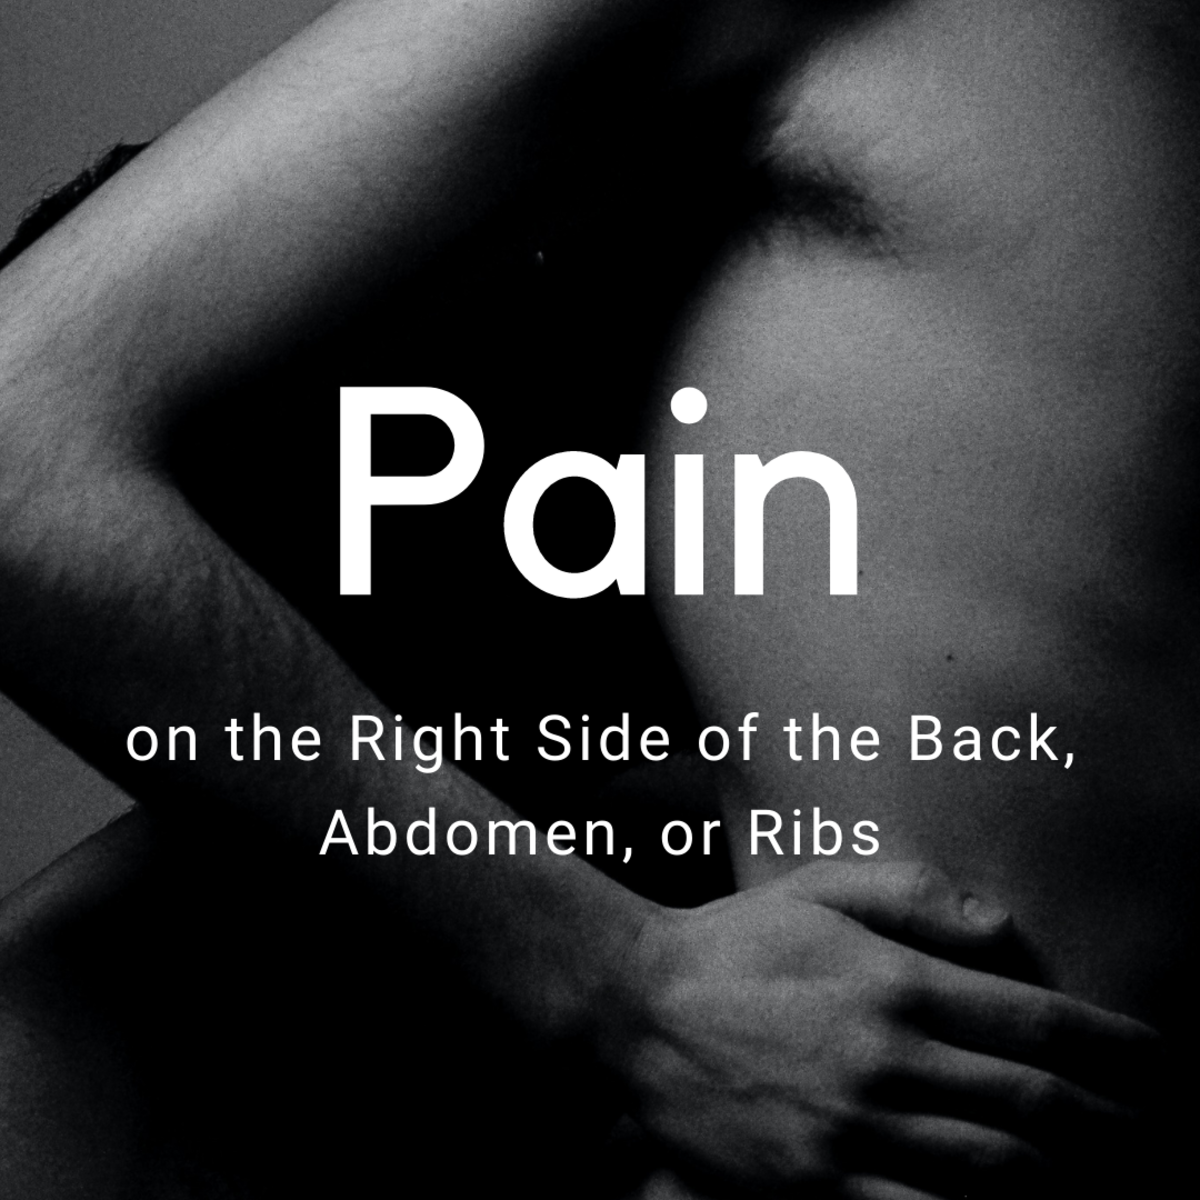 Severe Pain on the Right Side of the Back, Abdomen, and Ribs